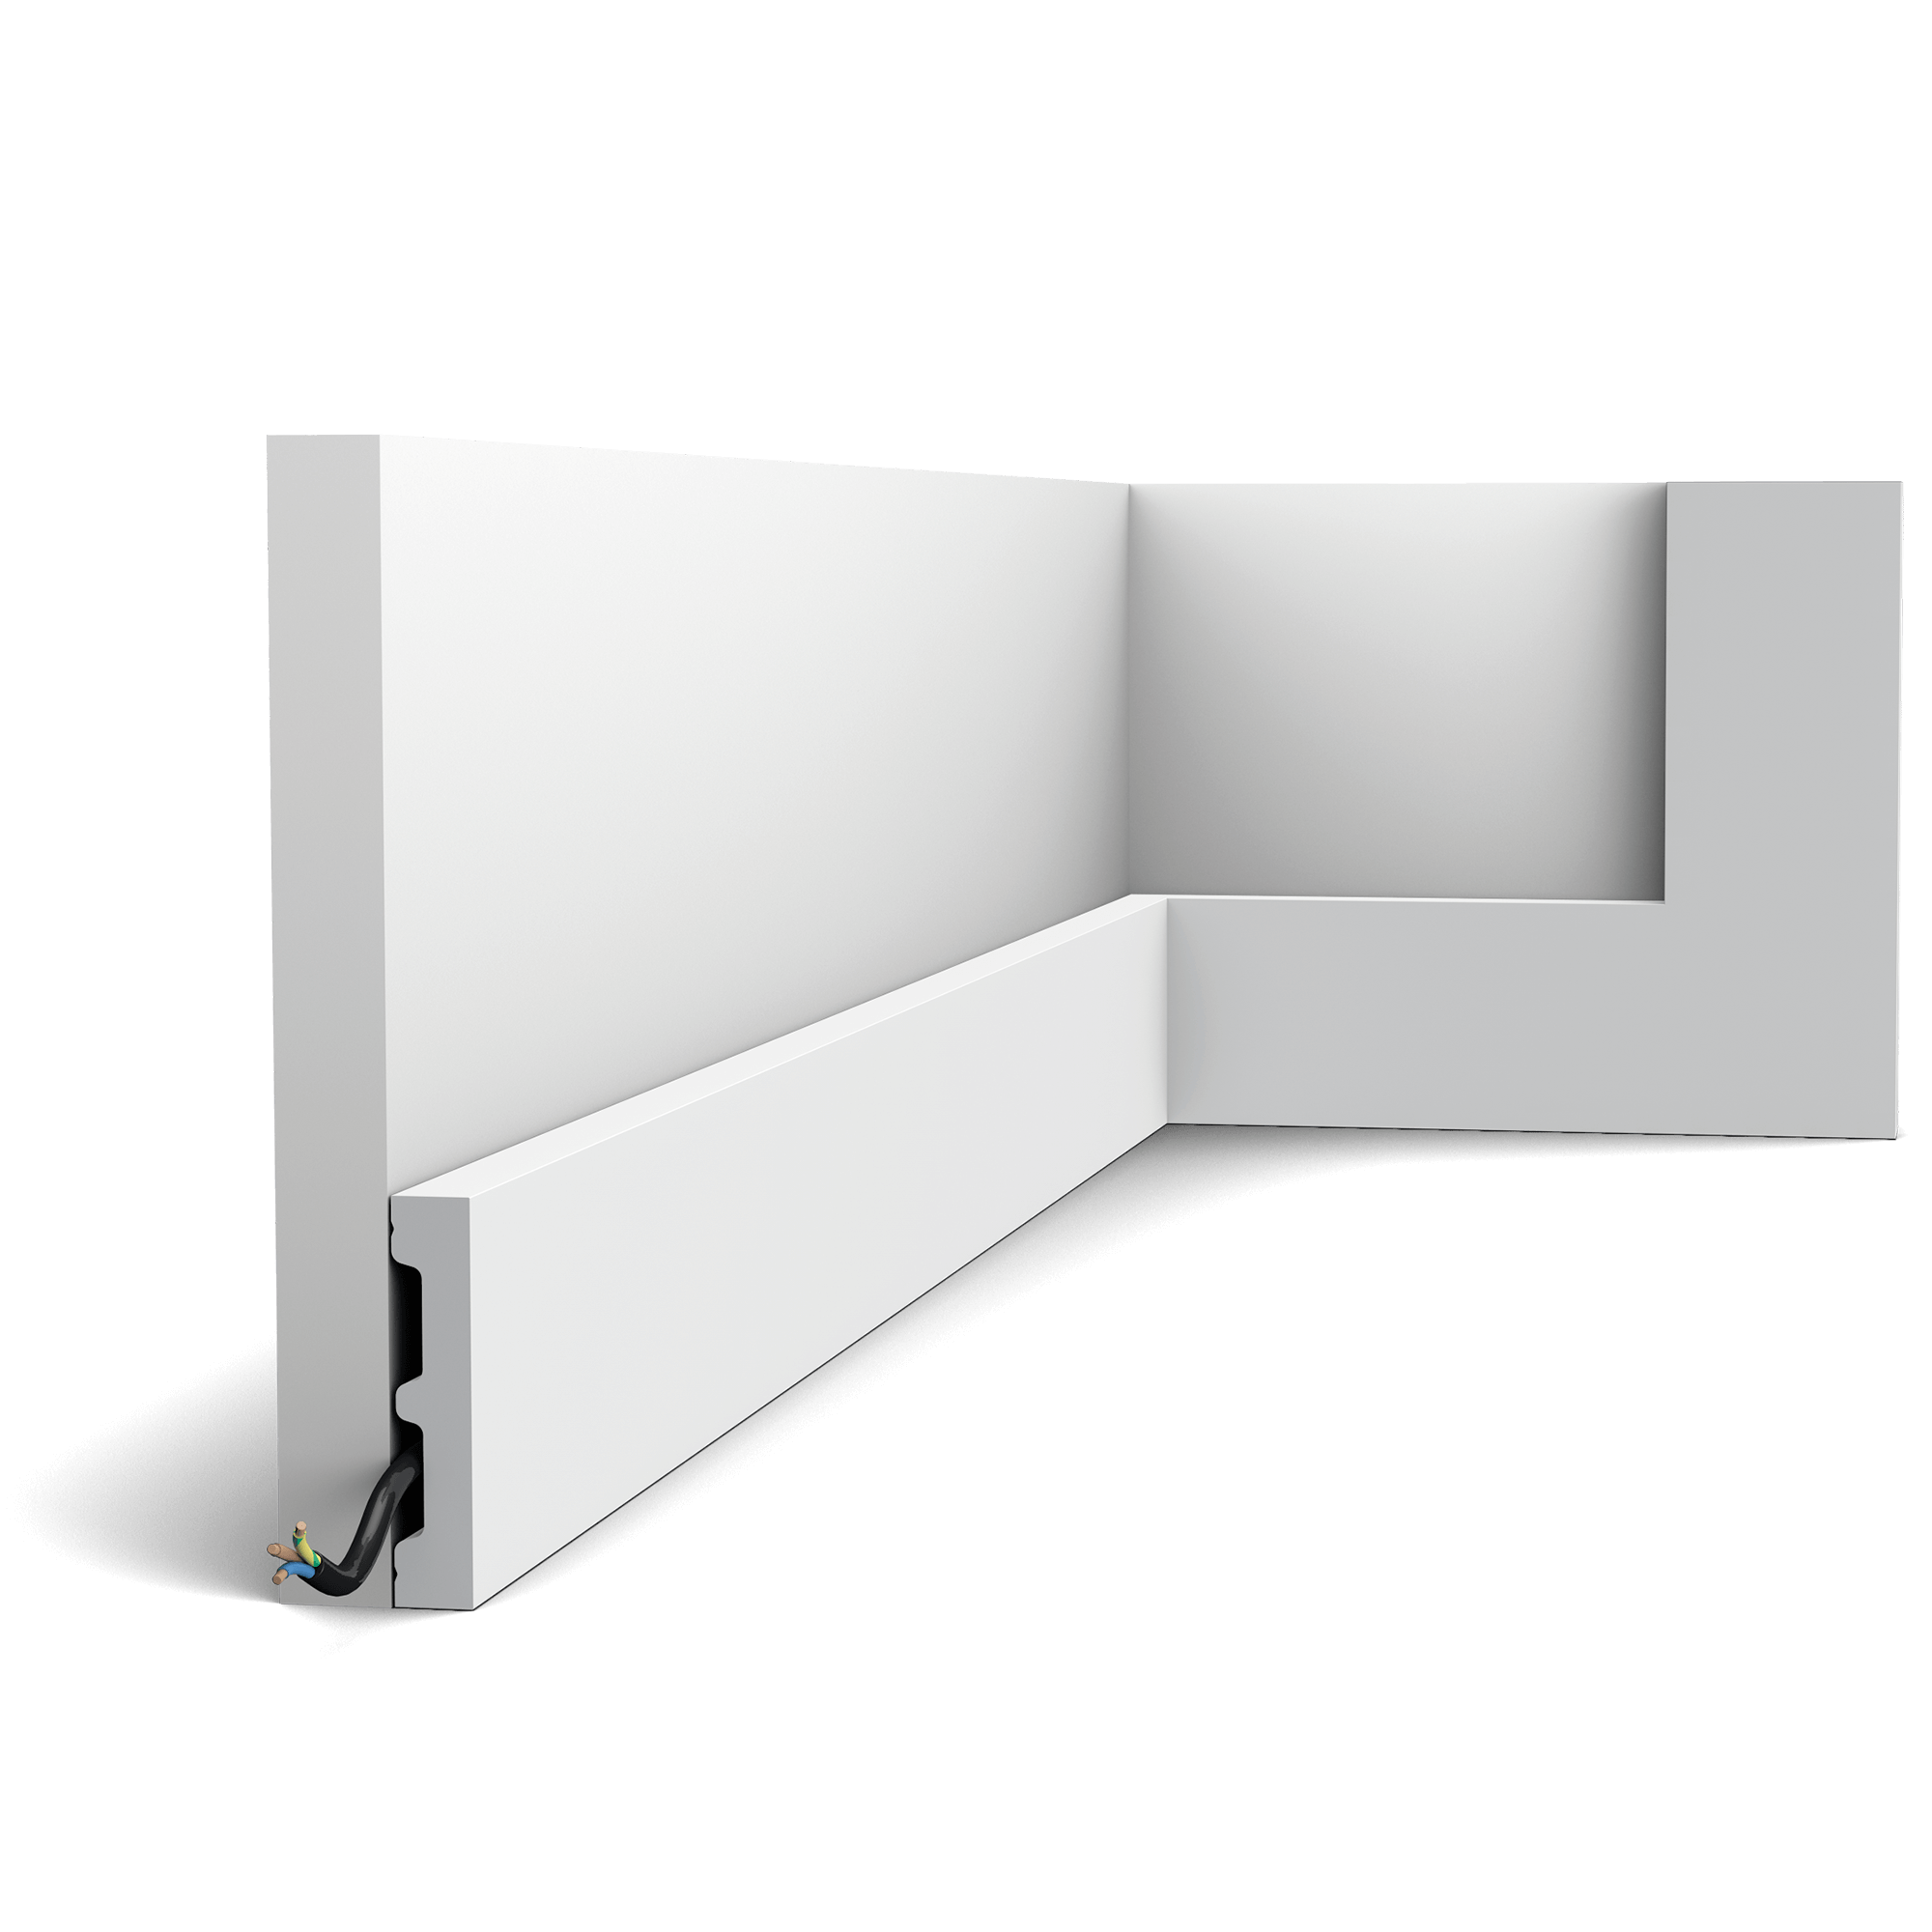 NEW - Product finished with RAL9003 Signal white. It is not necessary to repaint this profile after installation. Our simplest skirting board is part of the SQUARE family. Use this multifunctional profile to fit your entire home with the same skirting board. All you need to do is select the correct size to fit your space.